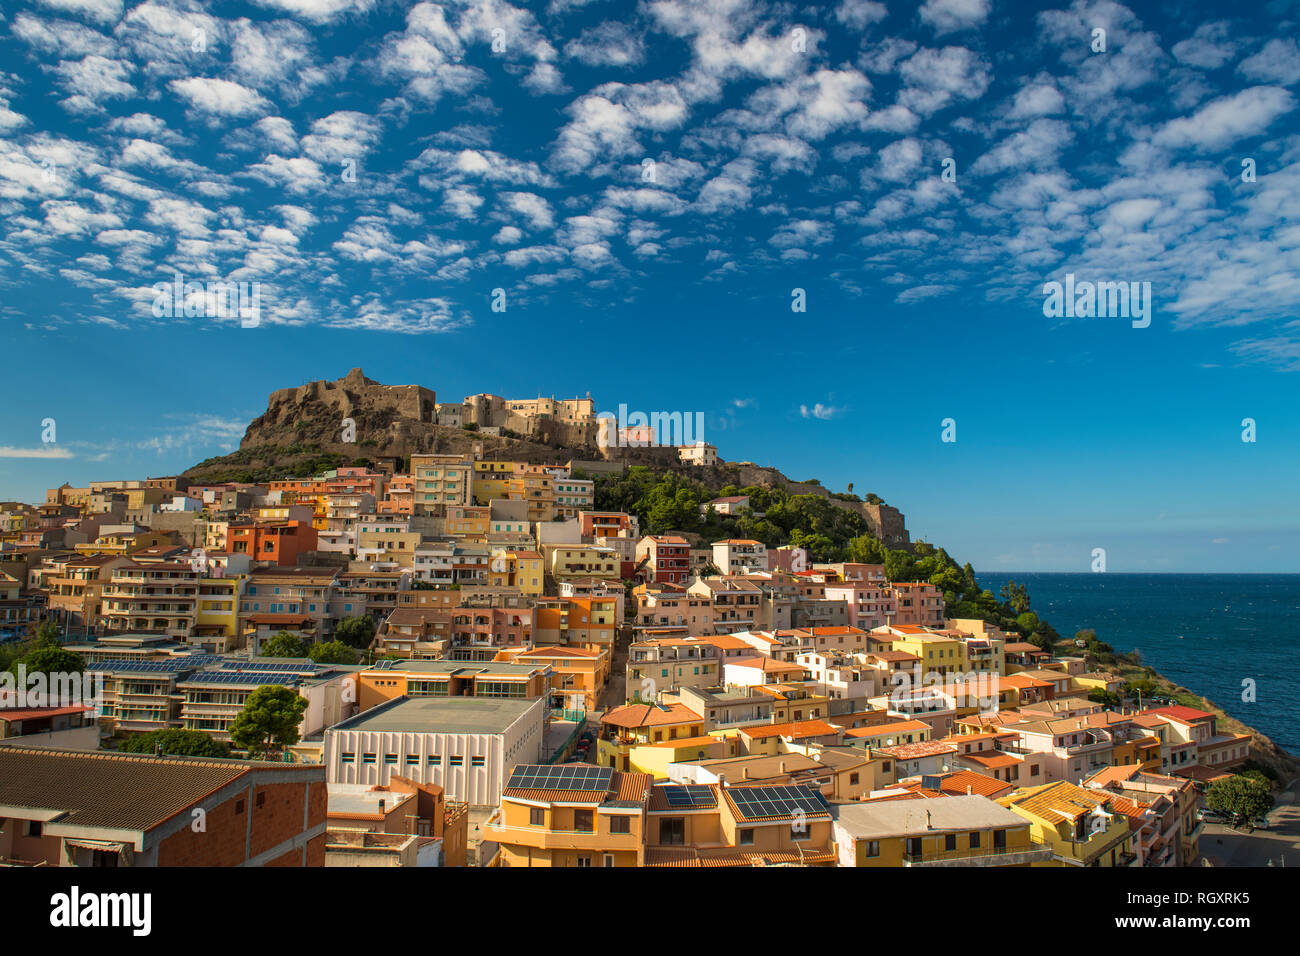 A view of Castelsardo town in Sardinia, Italy, with Mediterranean Sea in the background. Stock Photo